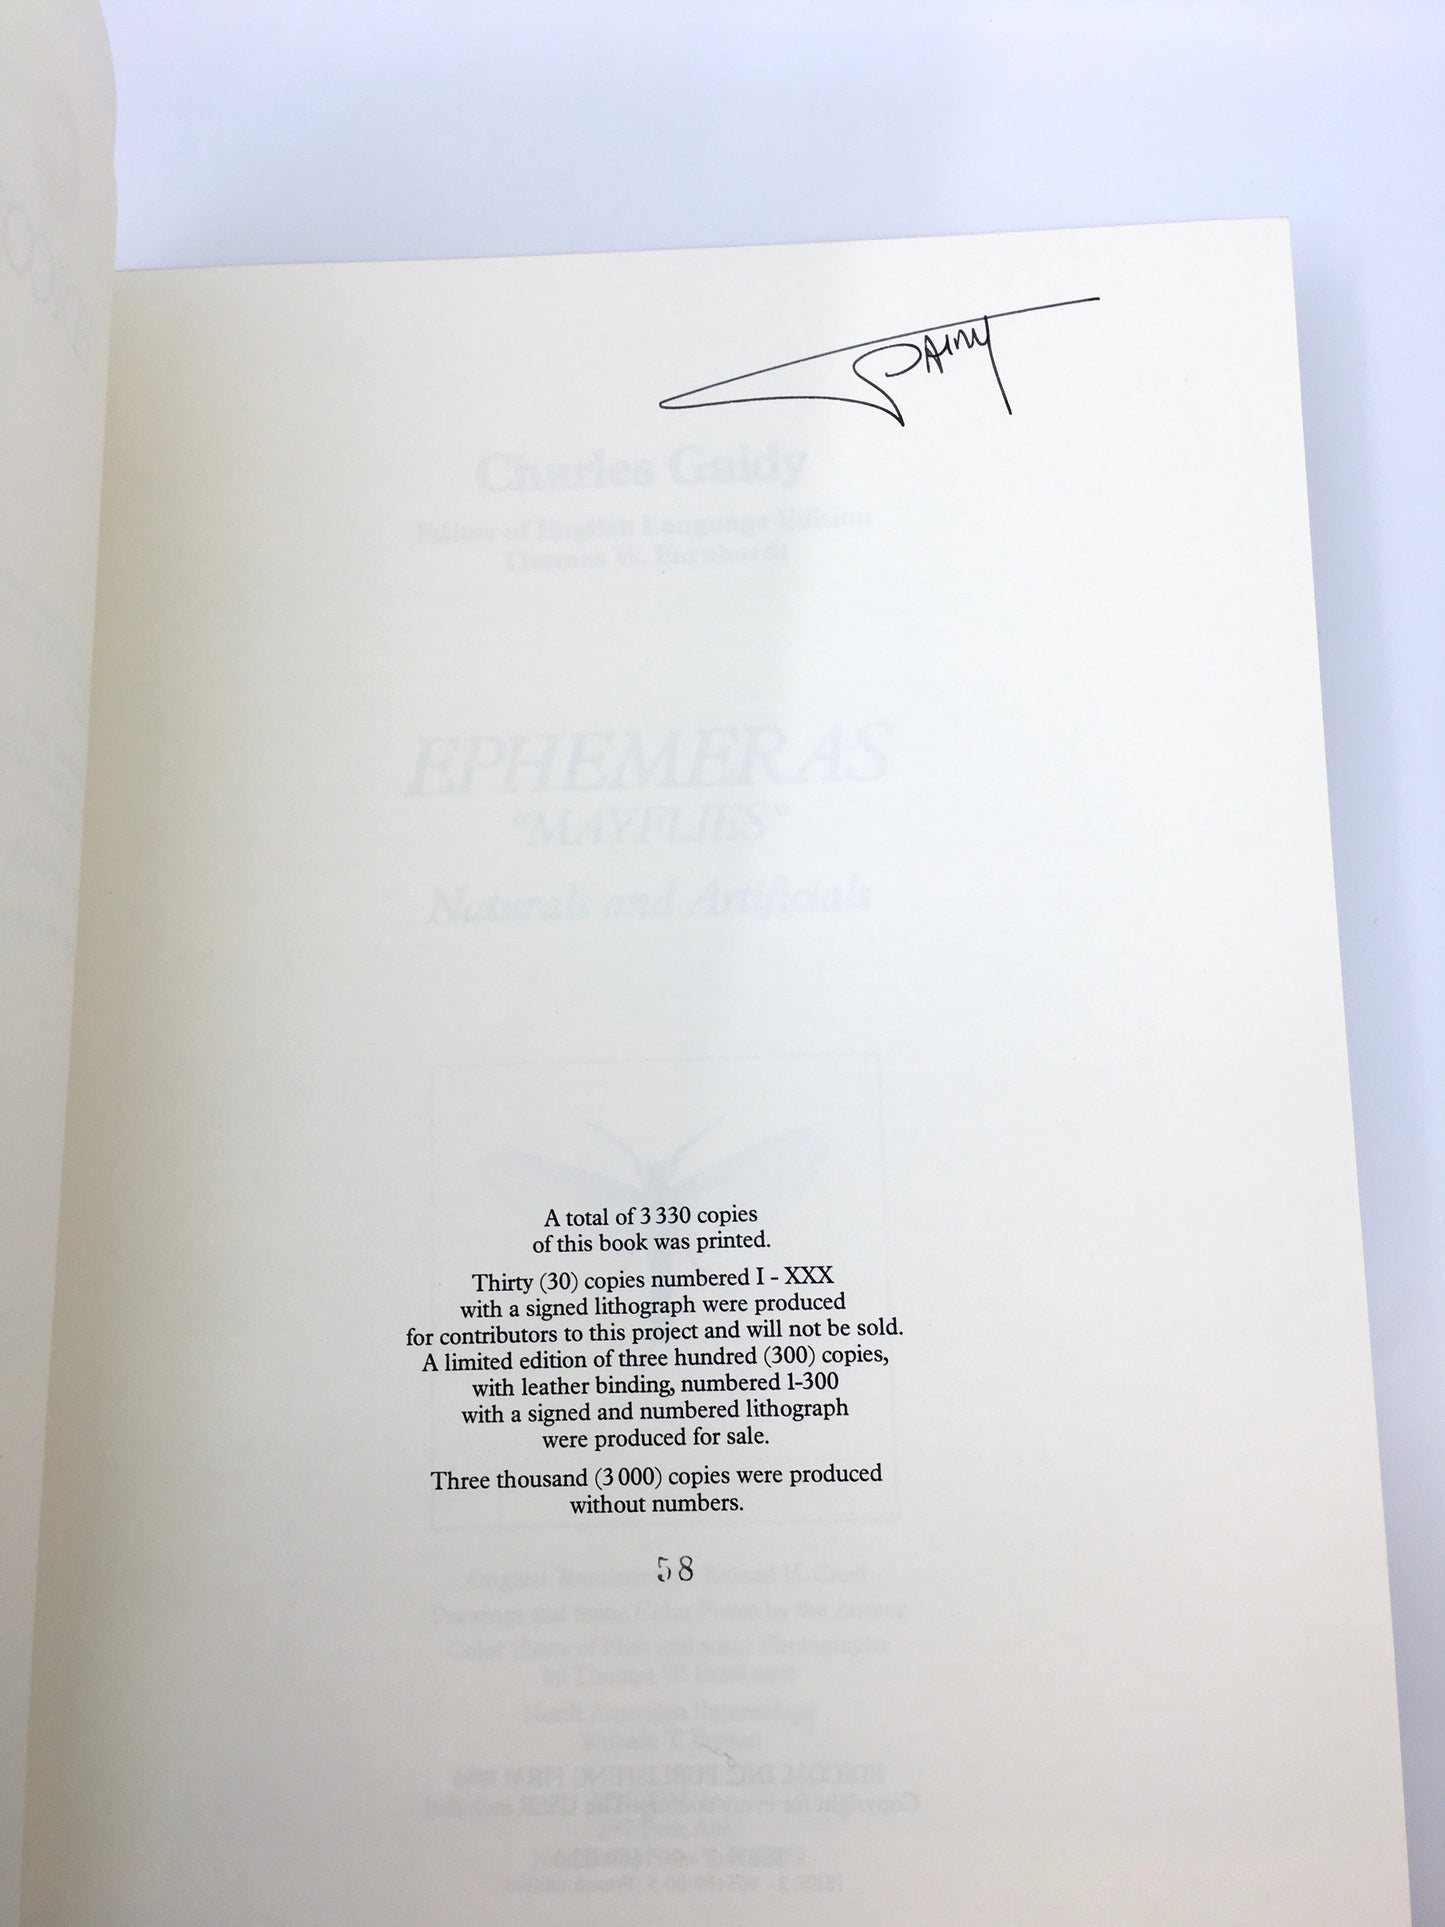 Ephemeras "Mayflies": Naturals and Artificials (limited edition, signed)